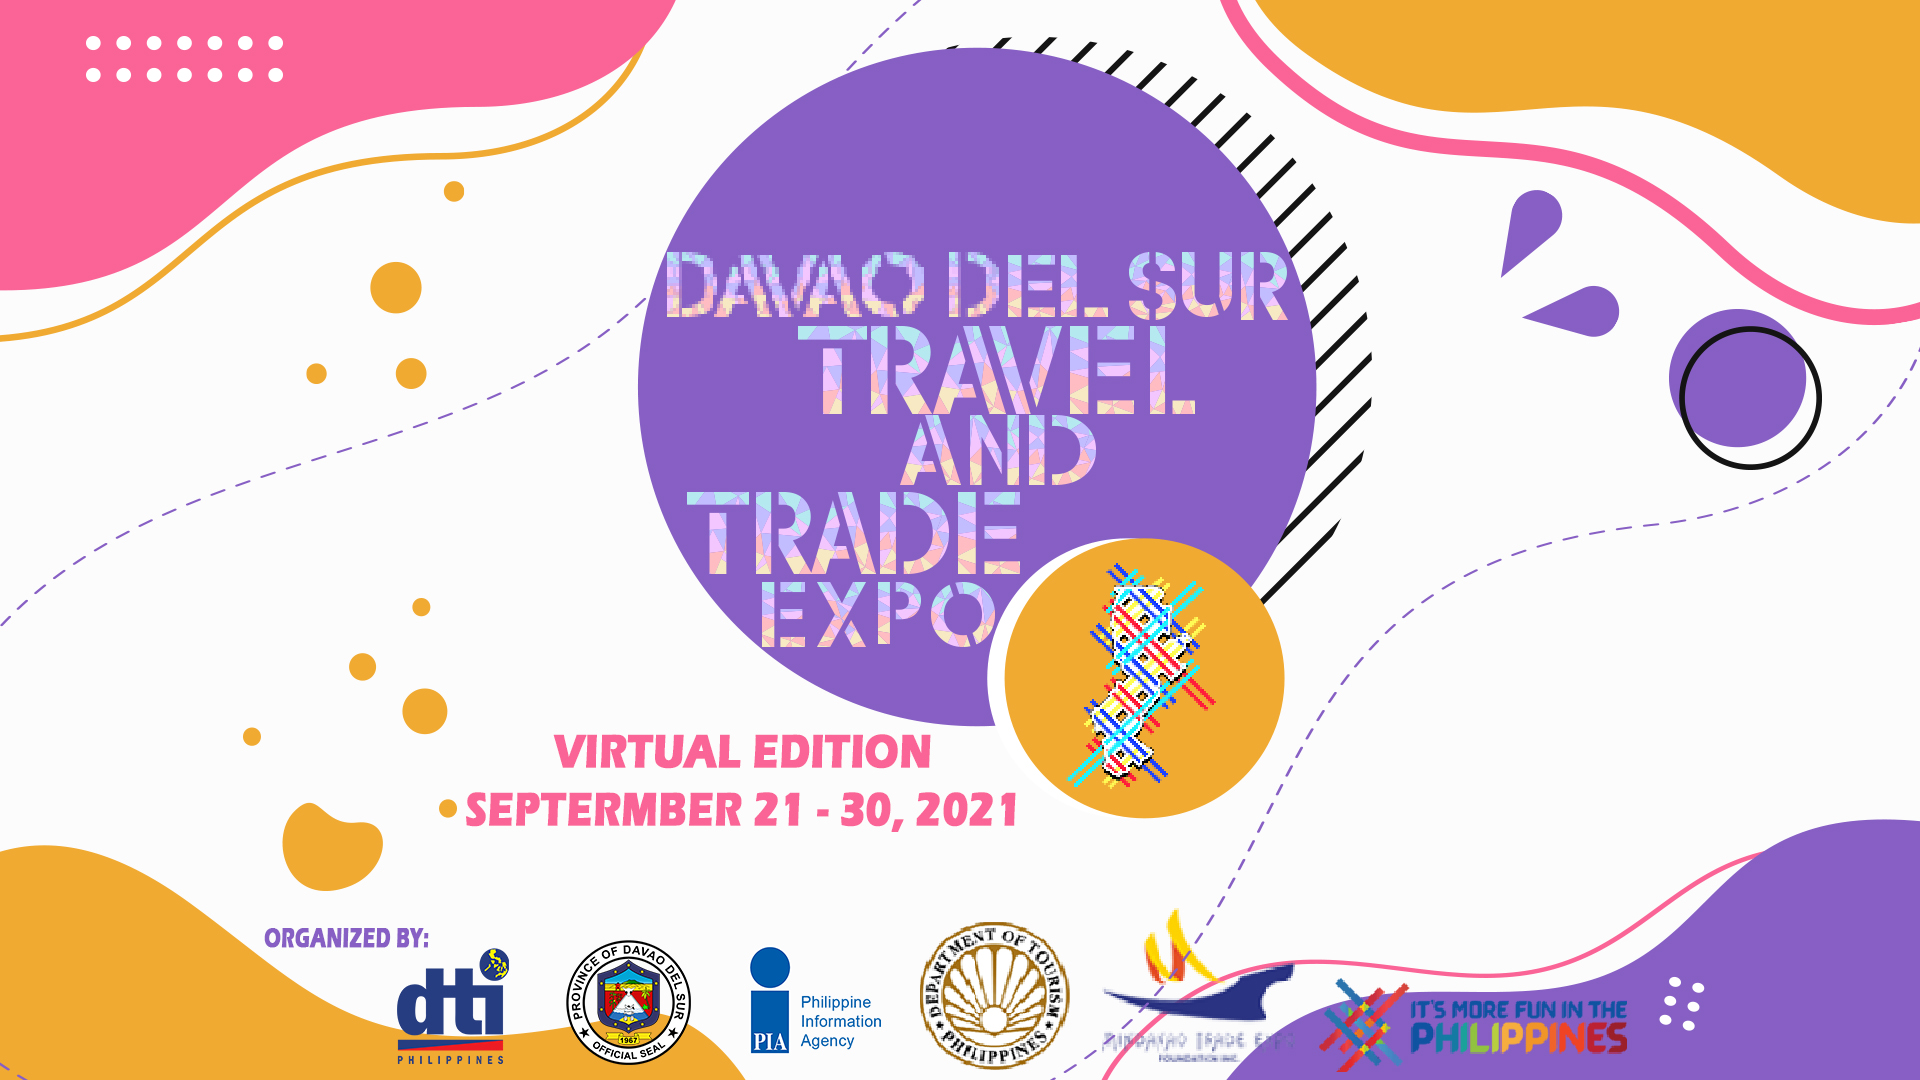 DavSur travel and trade expo supports MSMEs